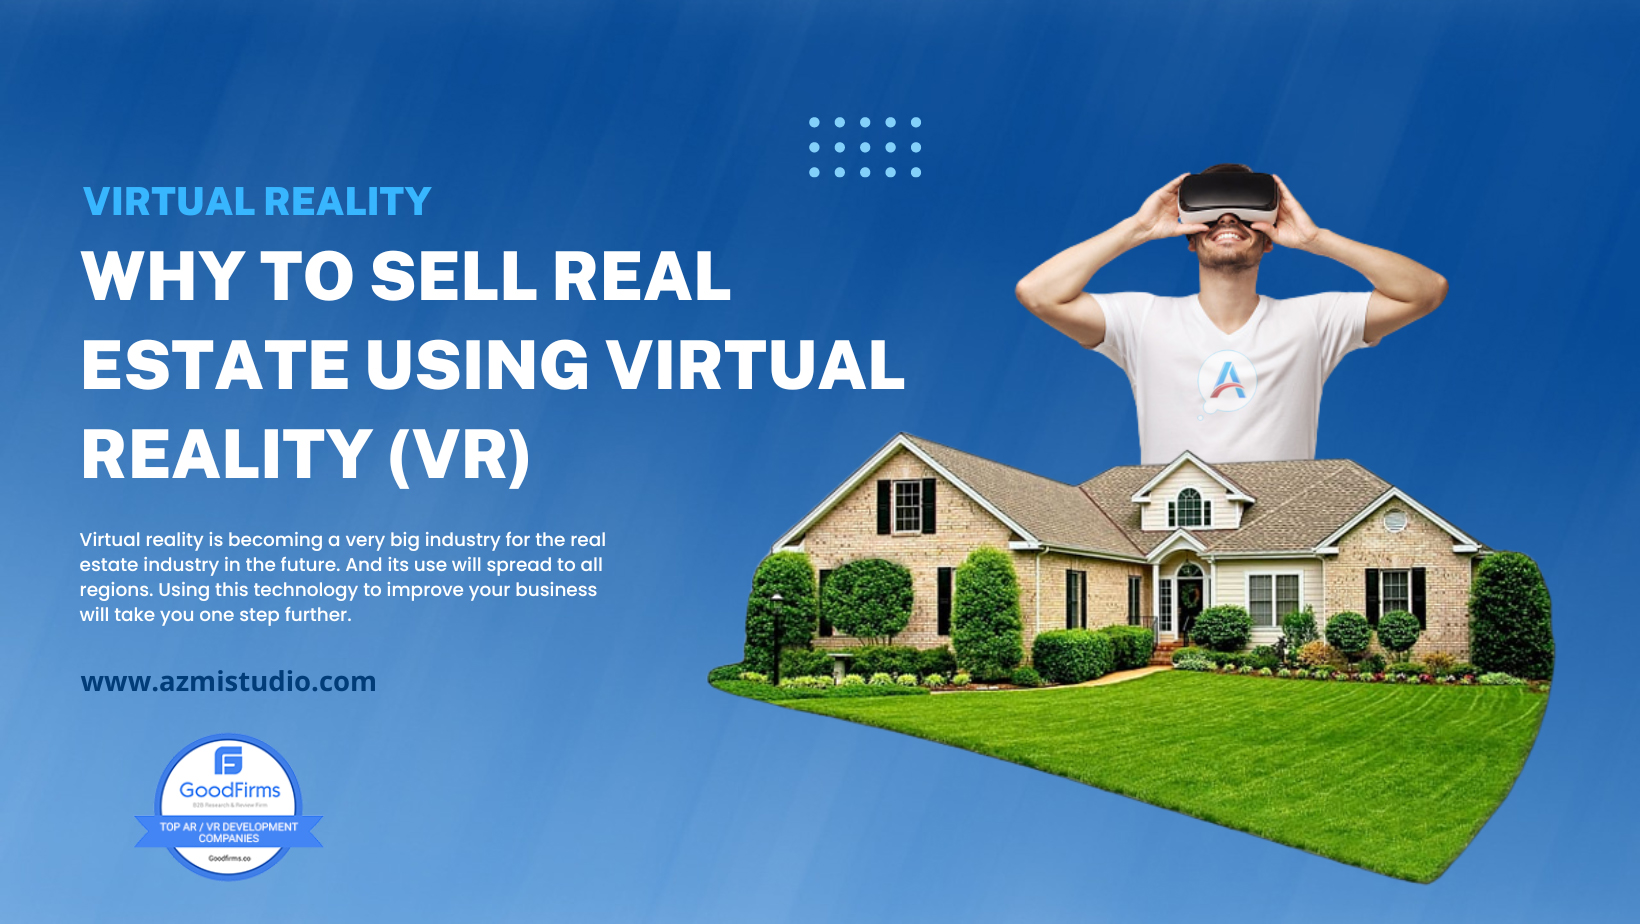 Why to Sell Real Estate Using Virtual Reality (VR)